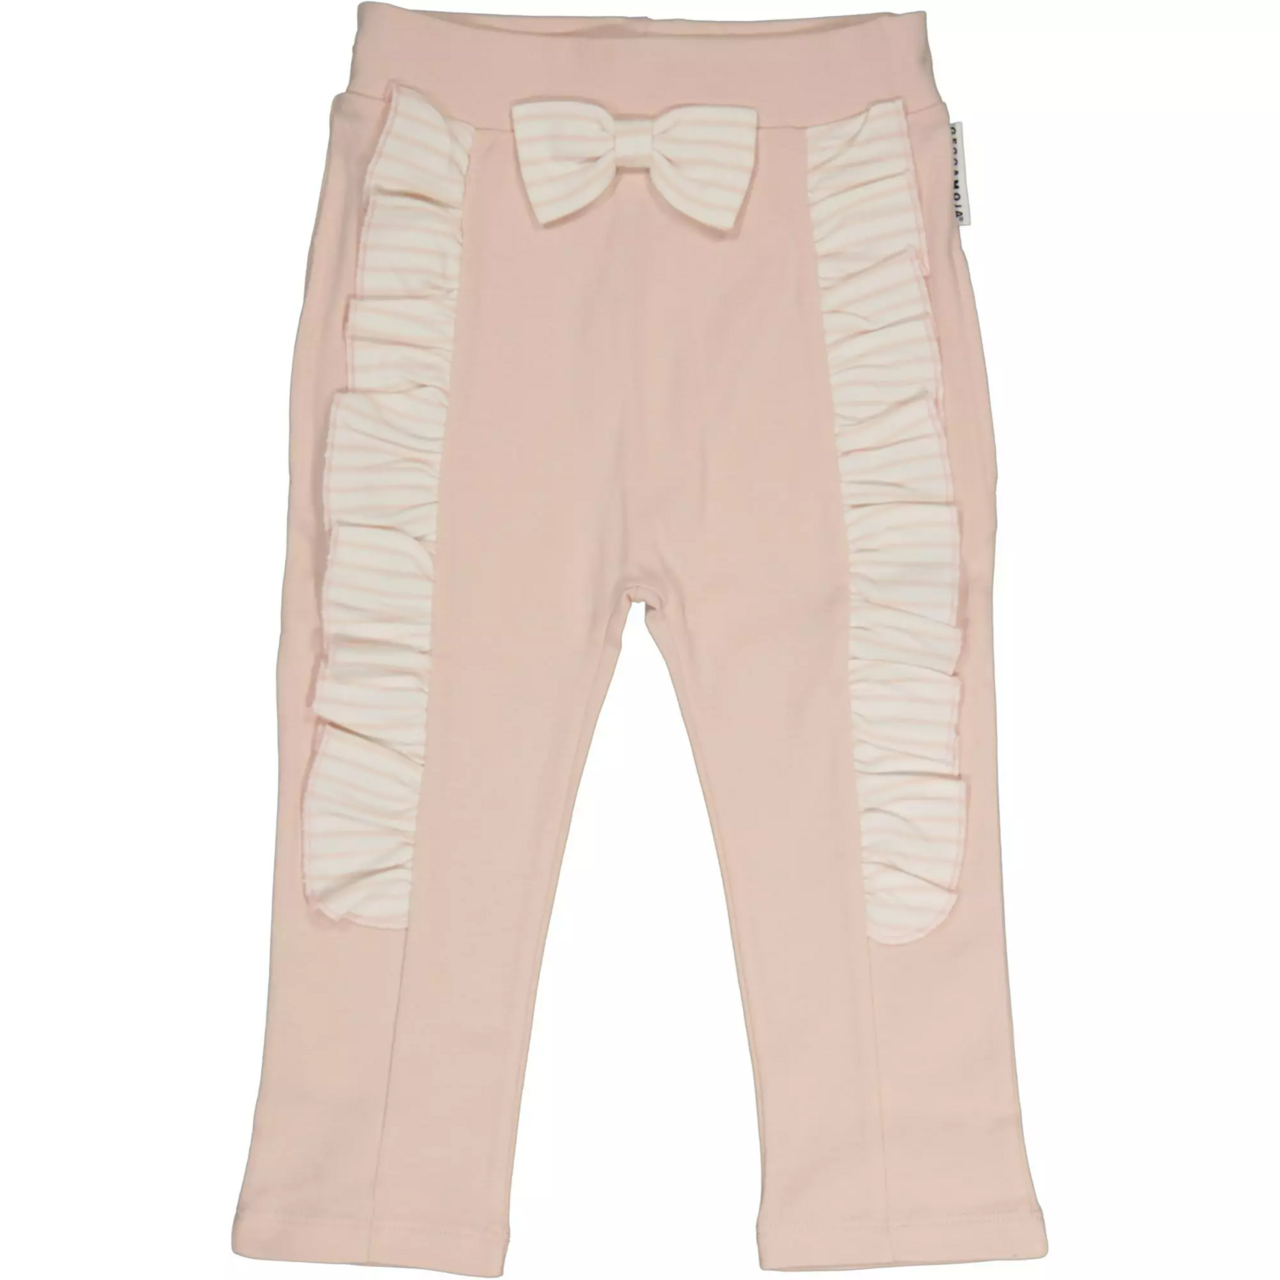 Flounce pant L.pink/offwhite 134/140